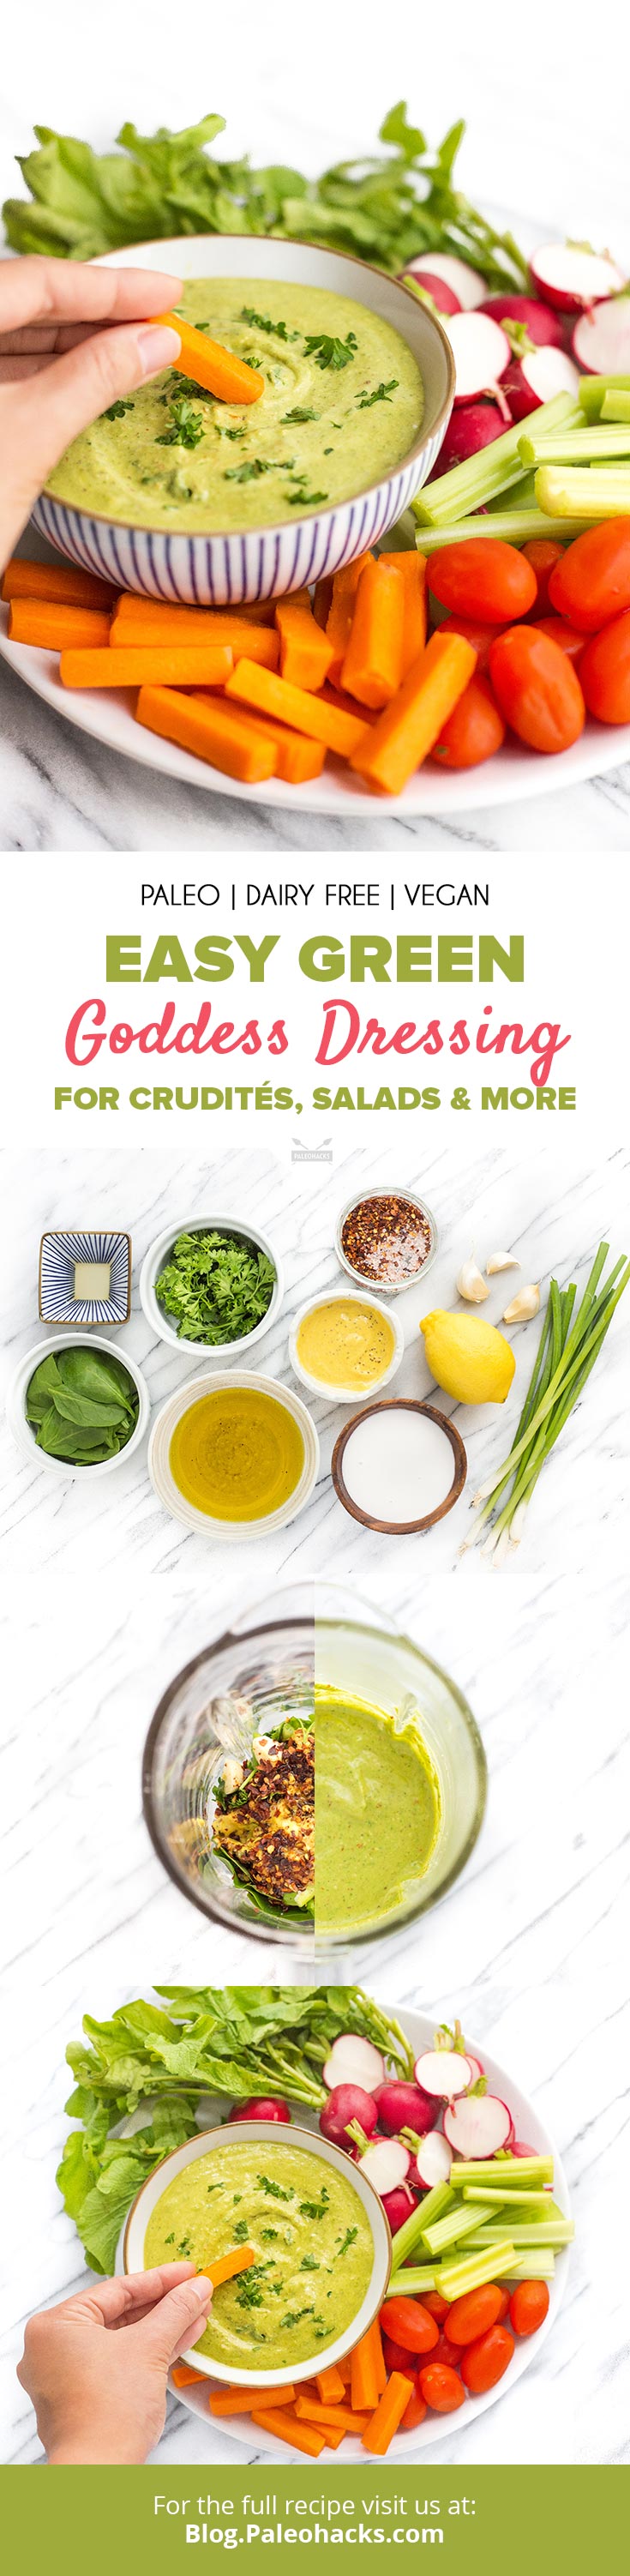 Serve your veggies with this creamy green goddess dressing everyone will be swooning over. This stuff goes on everything!